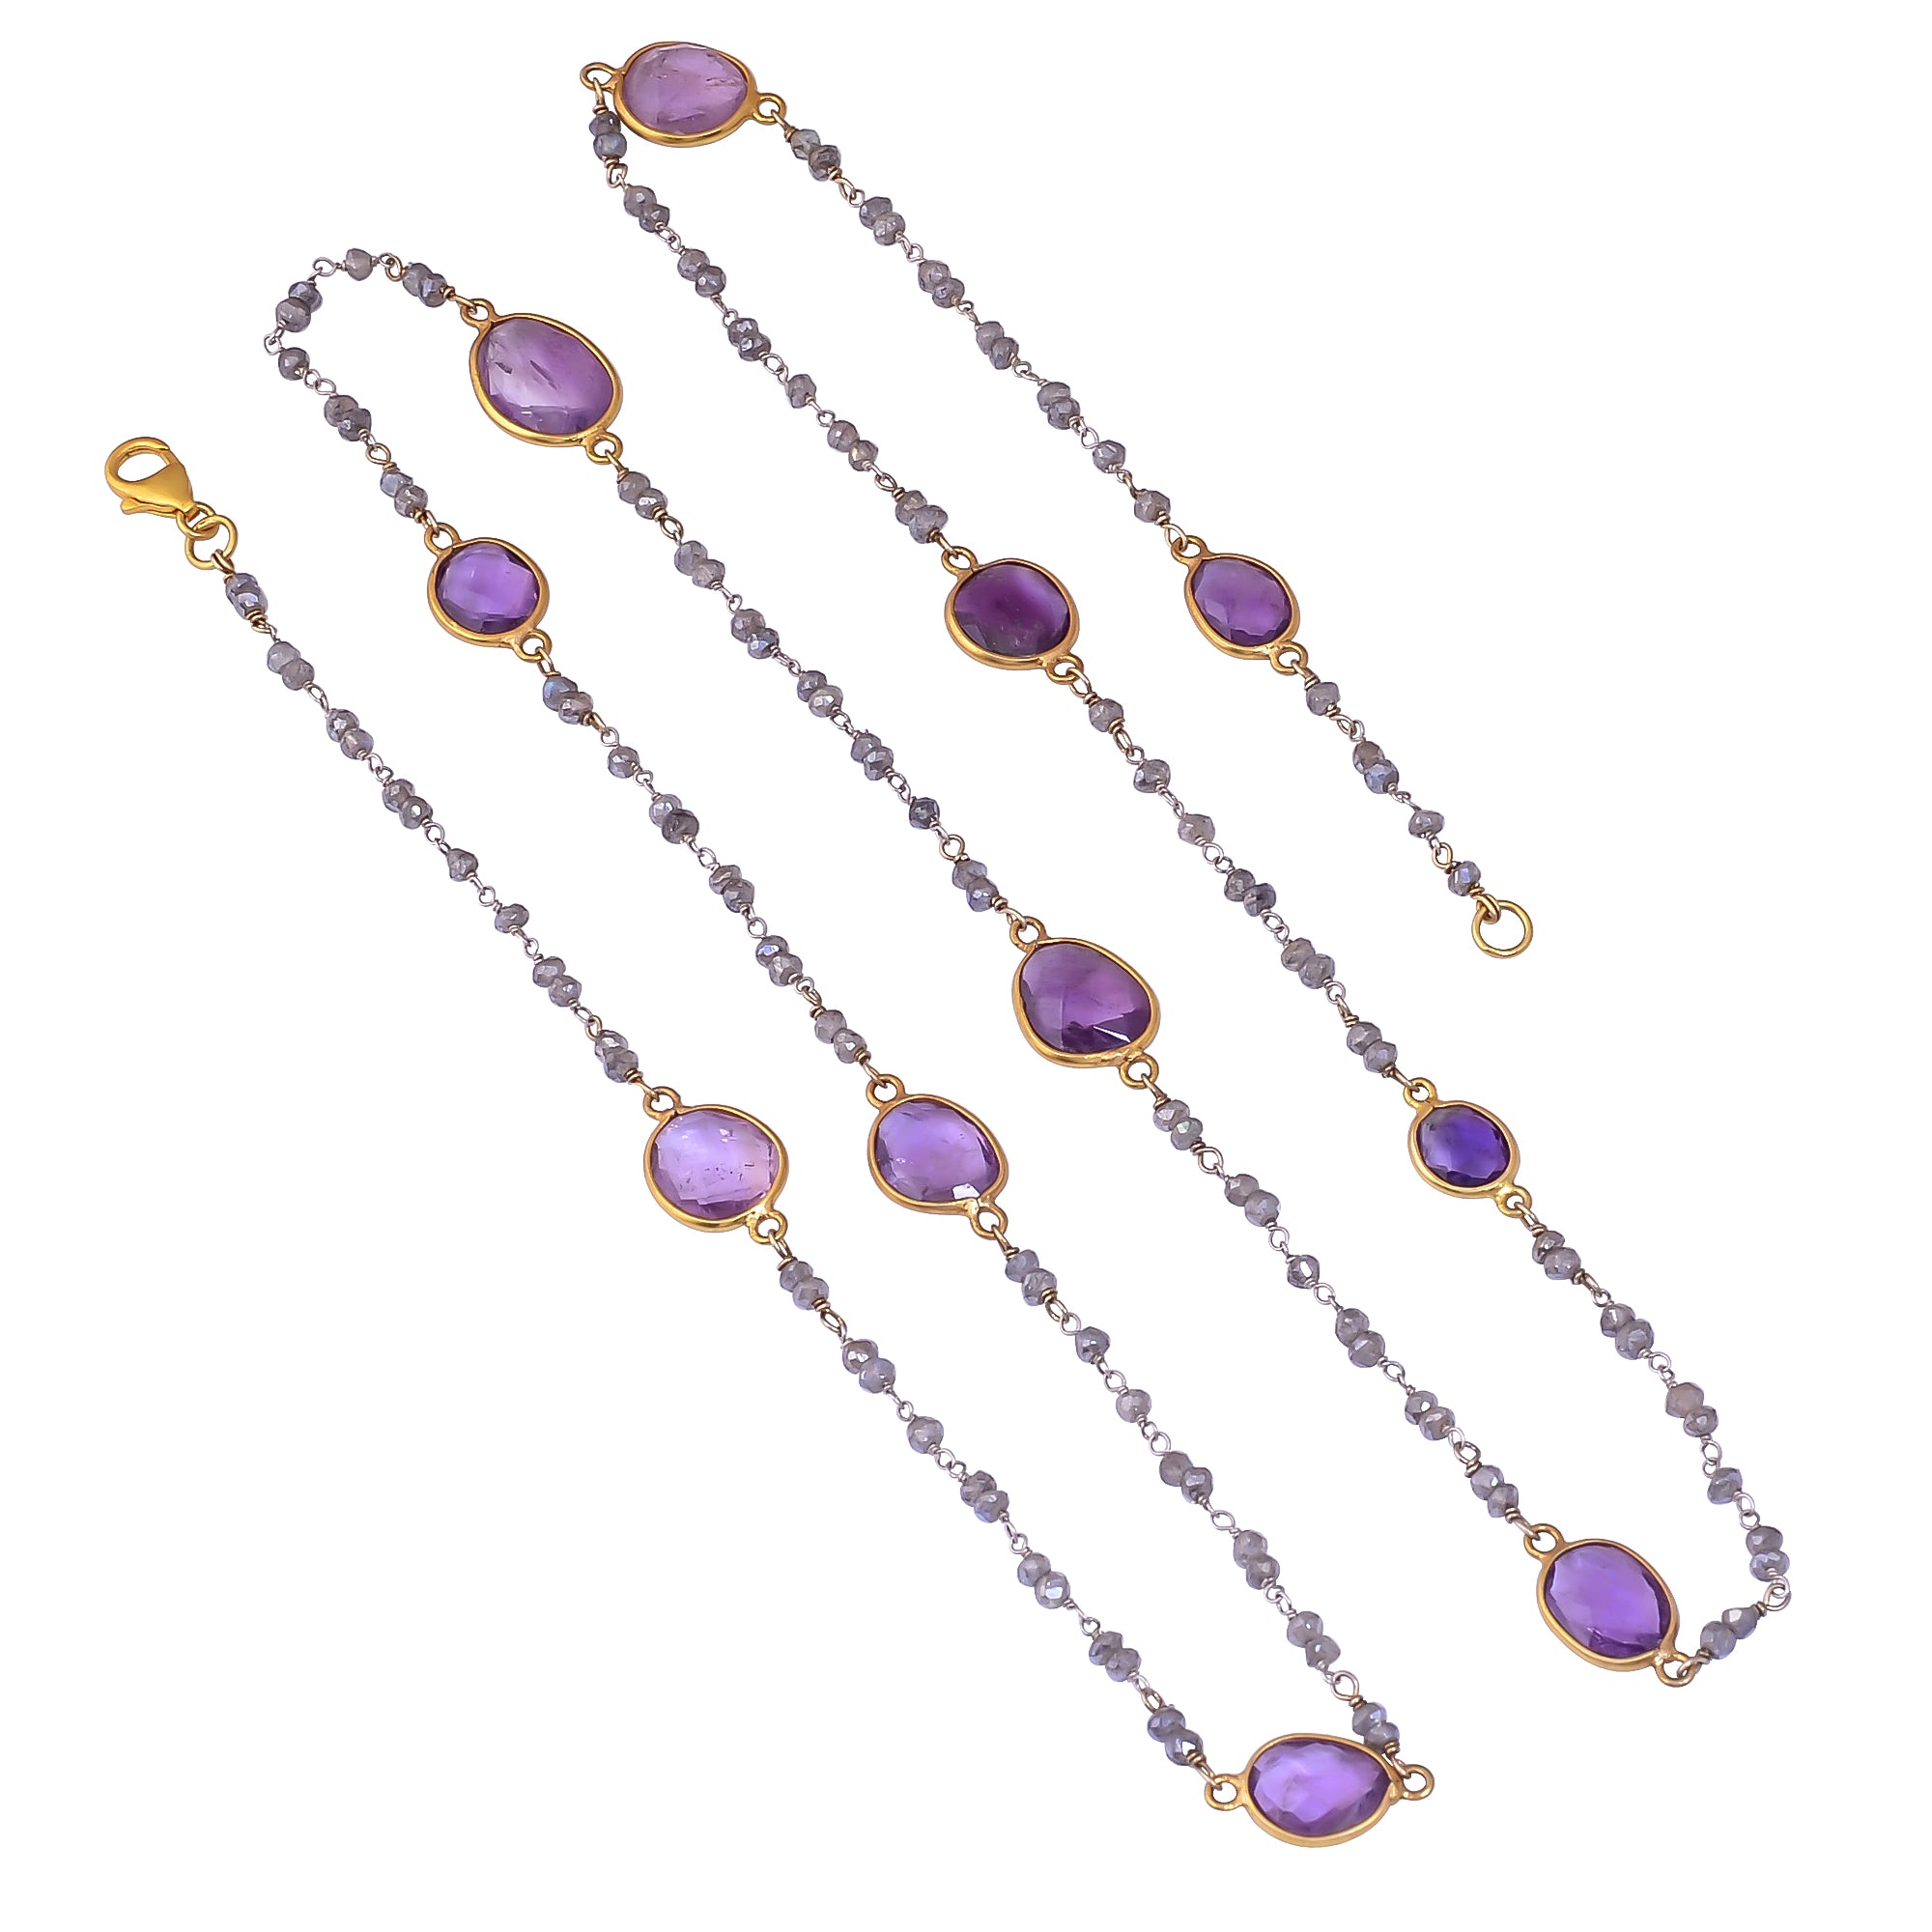 Buy Indian Handmade Silver Gold Plated Amethyst Collet/labrodarite Long Necklace